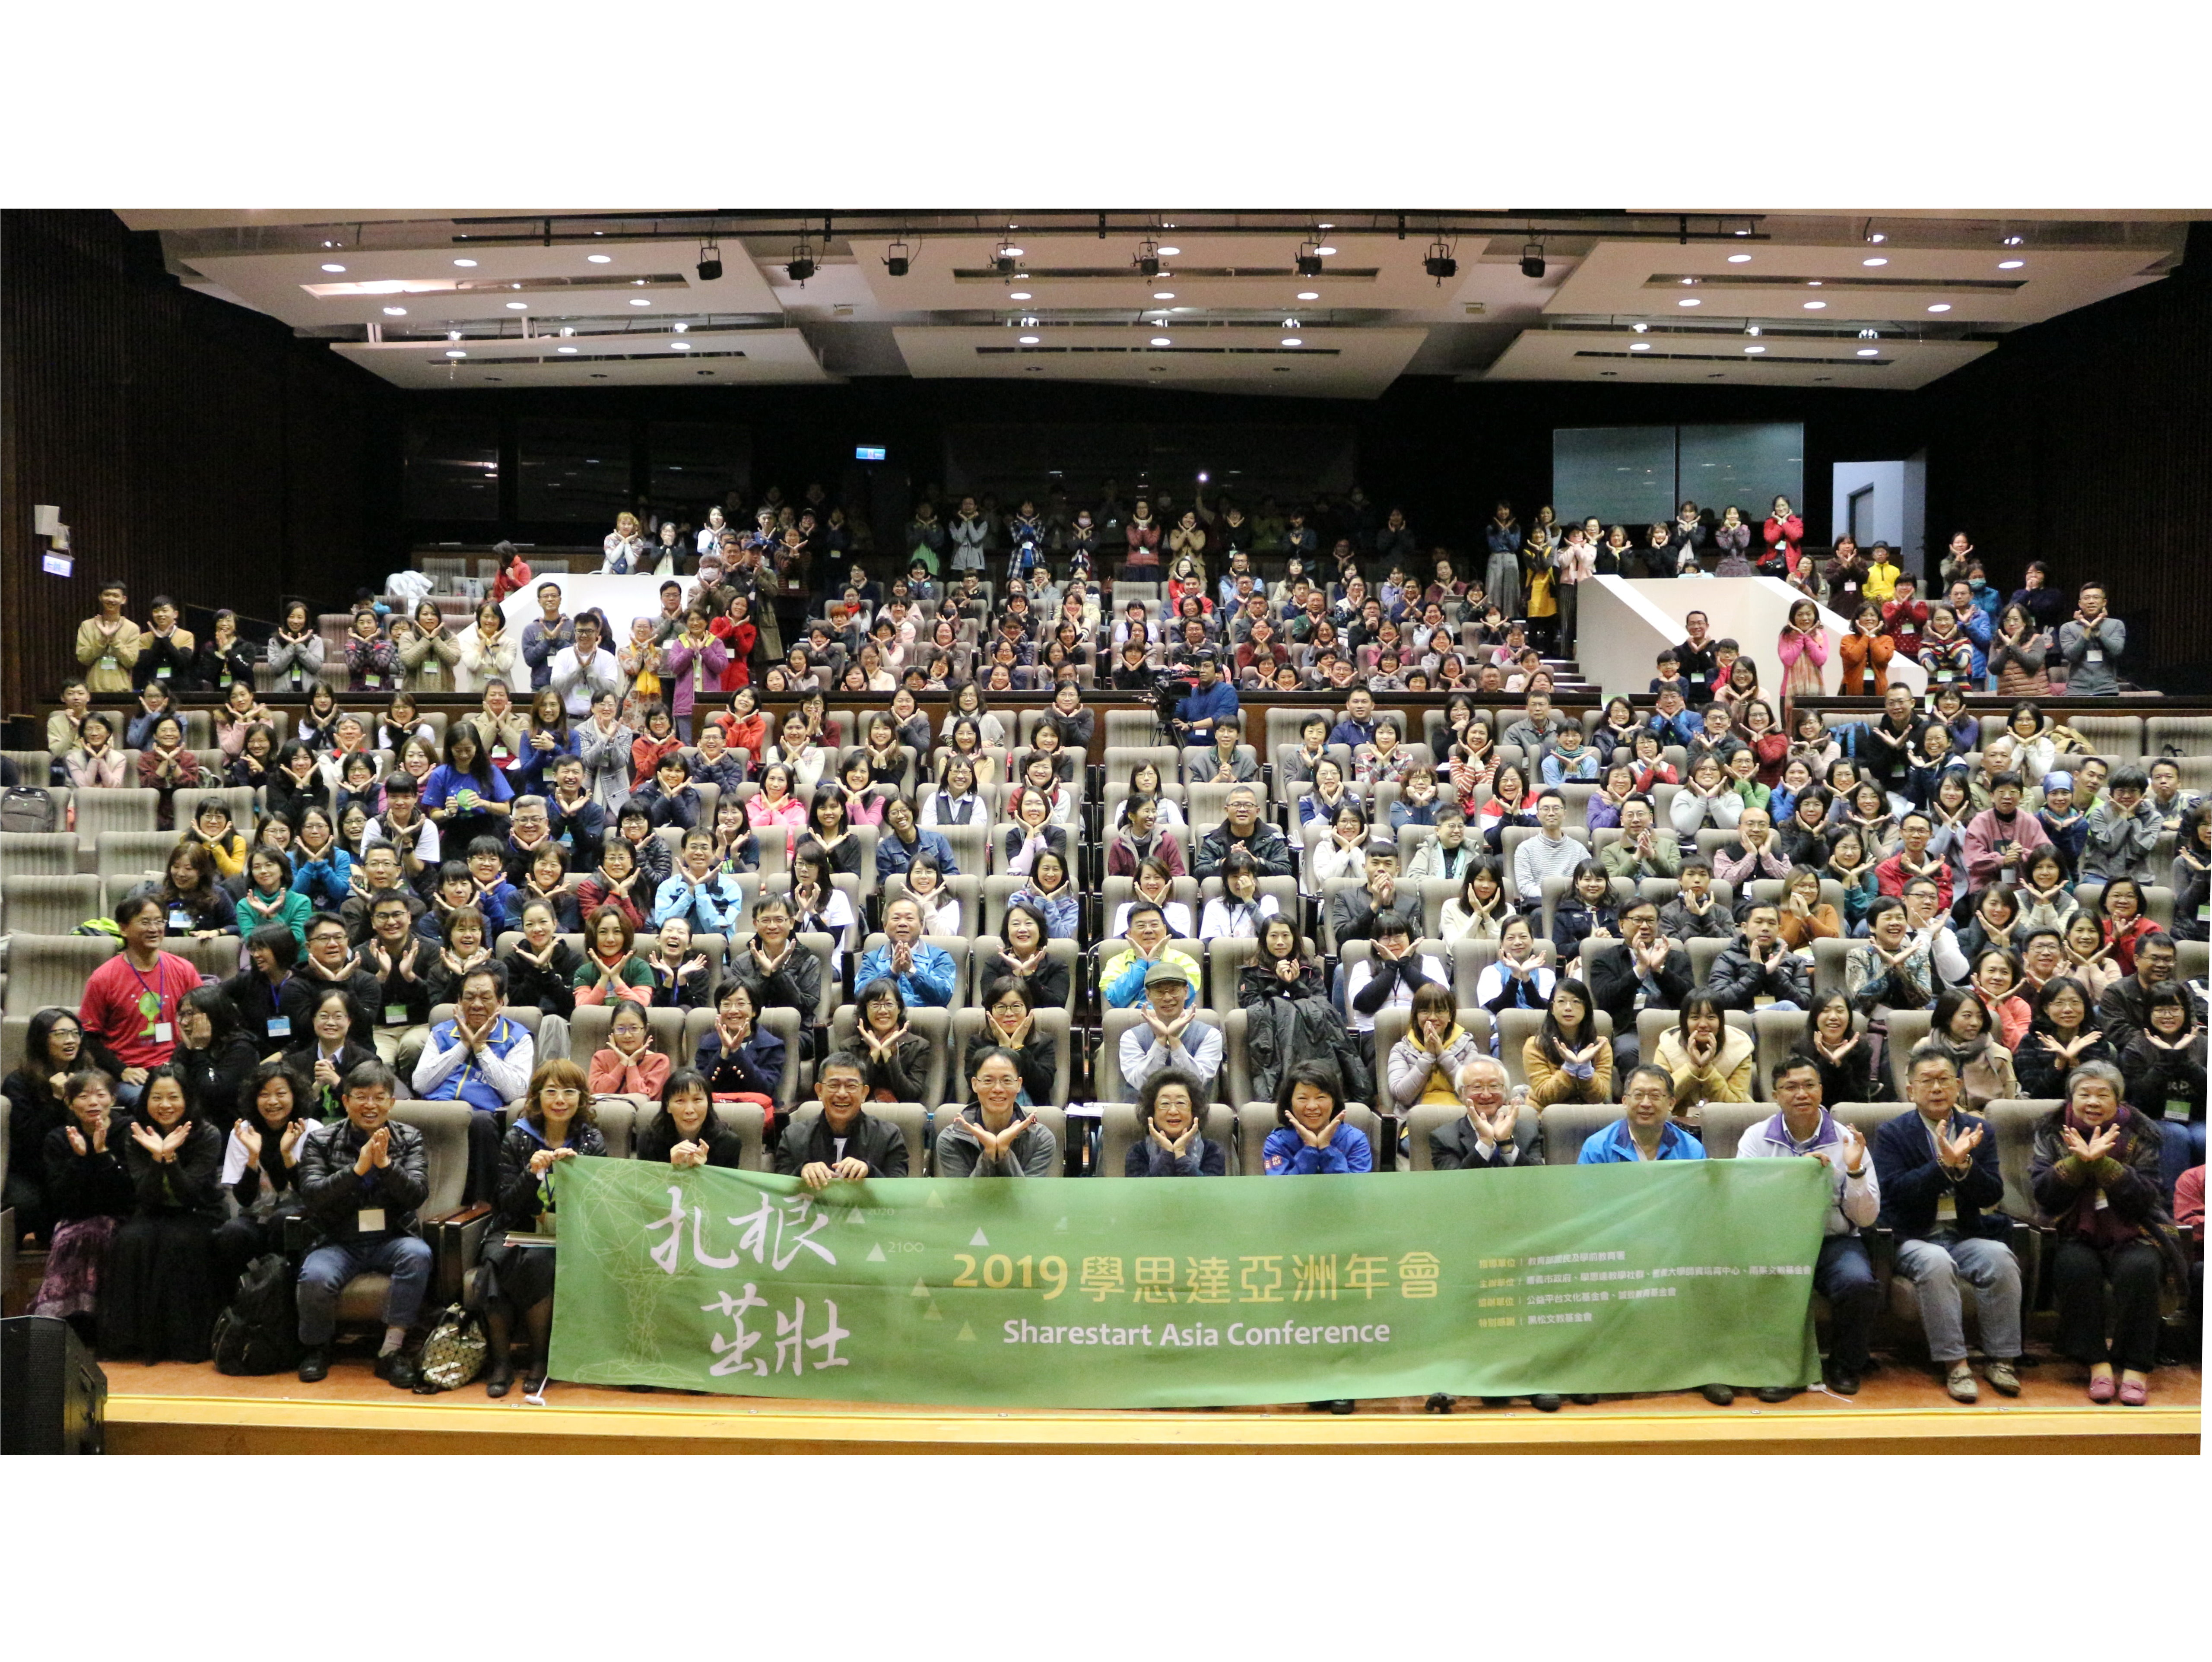 A group photo of honored guests and participating teachers